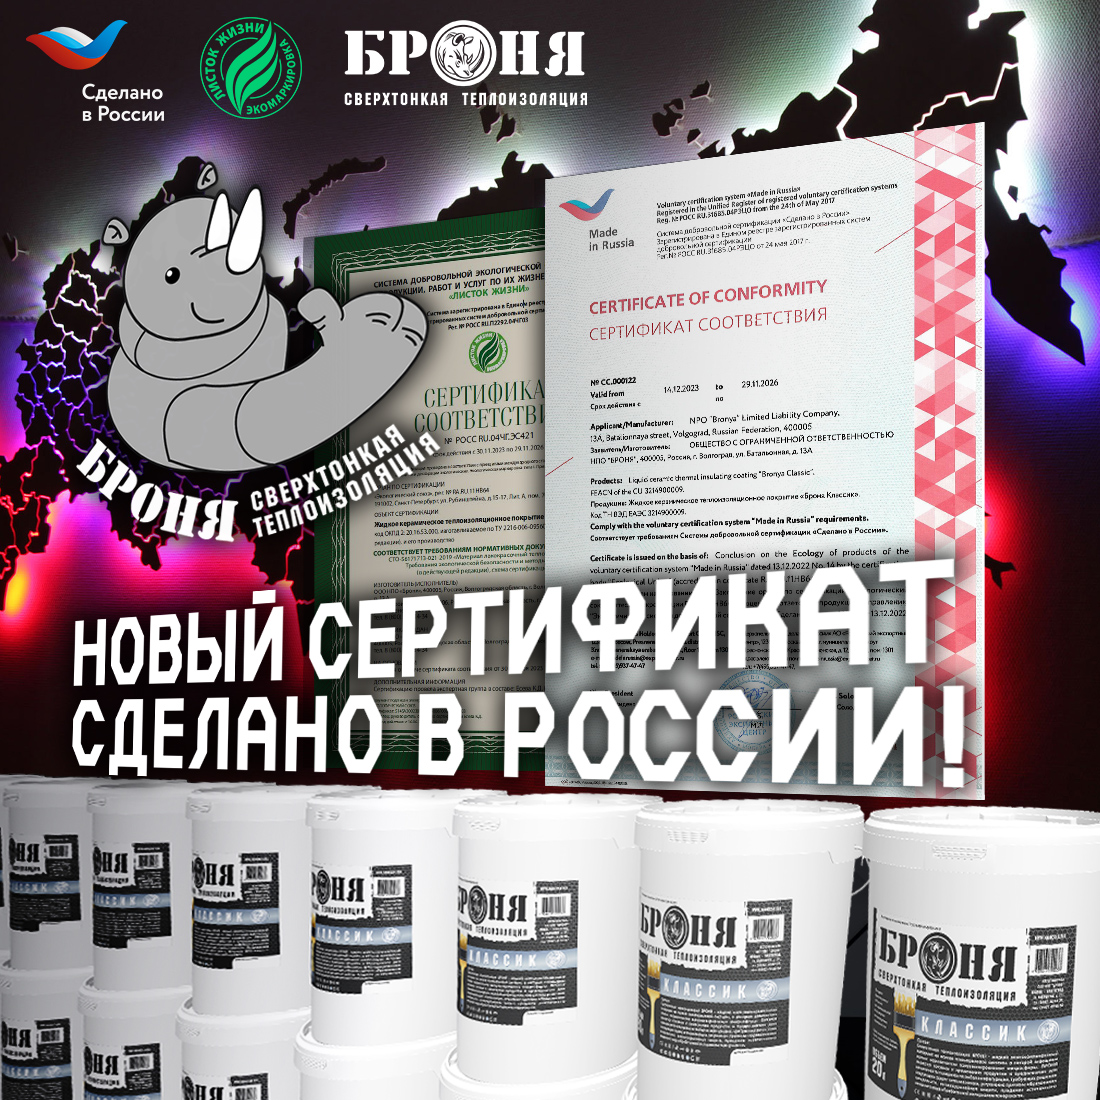 We have received a new certificate "Made in Russia" for 3 years! (Certificates)